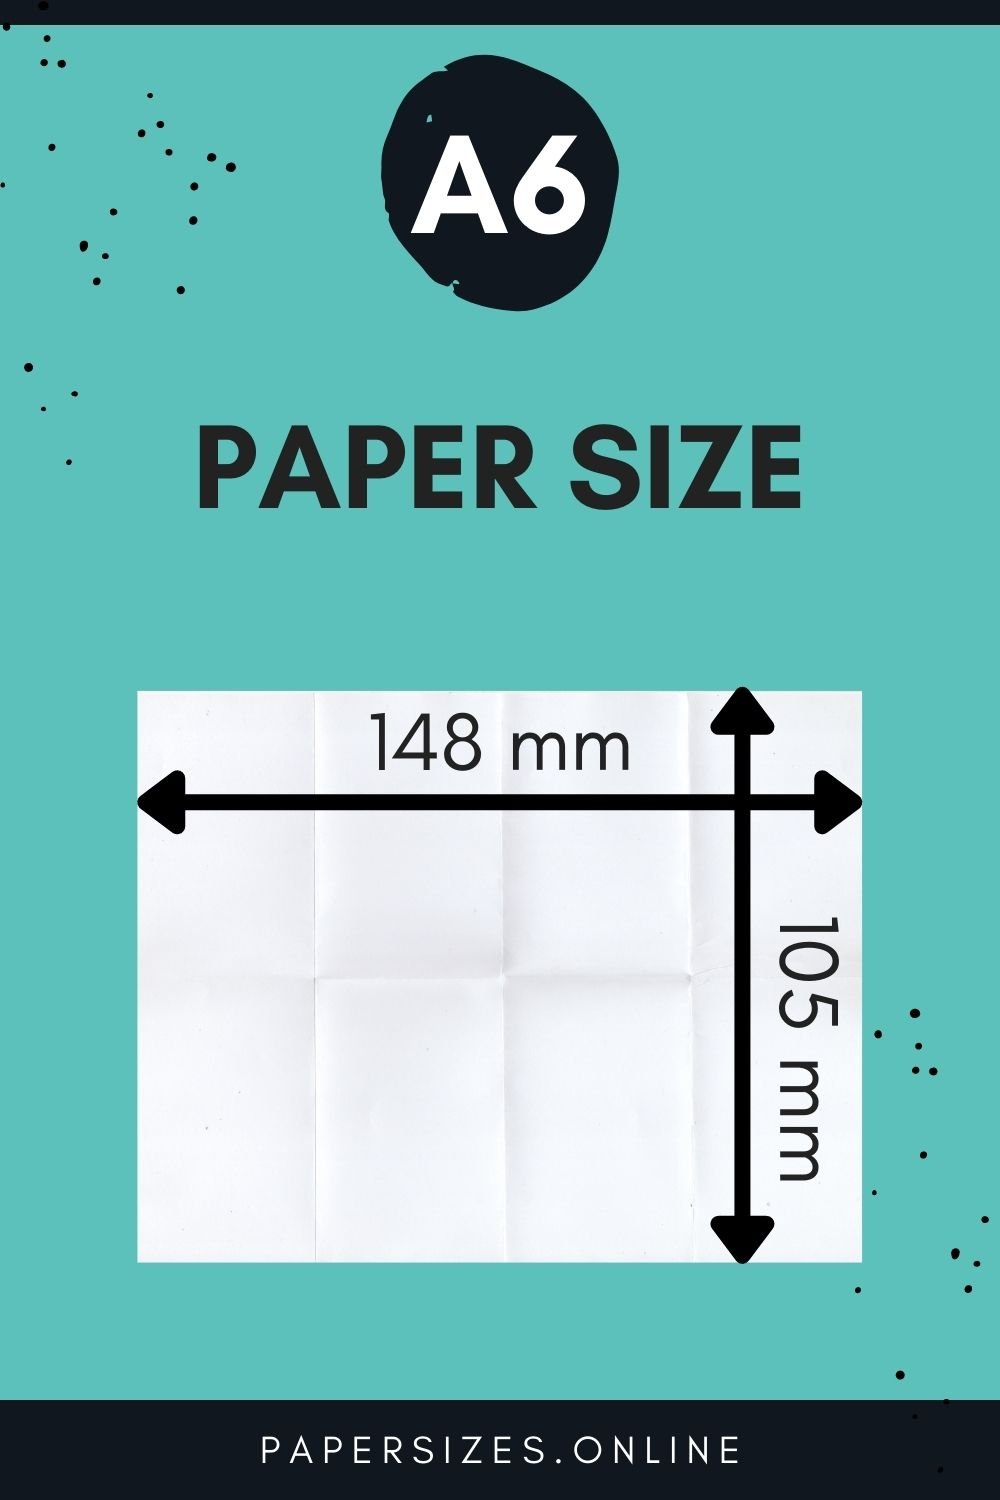 a6-paper-size-and-dimensions-paper-sizes-online